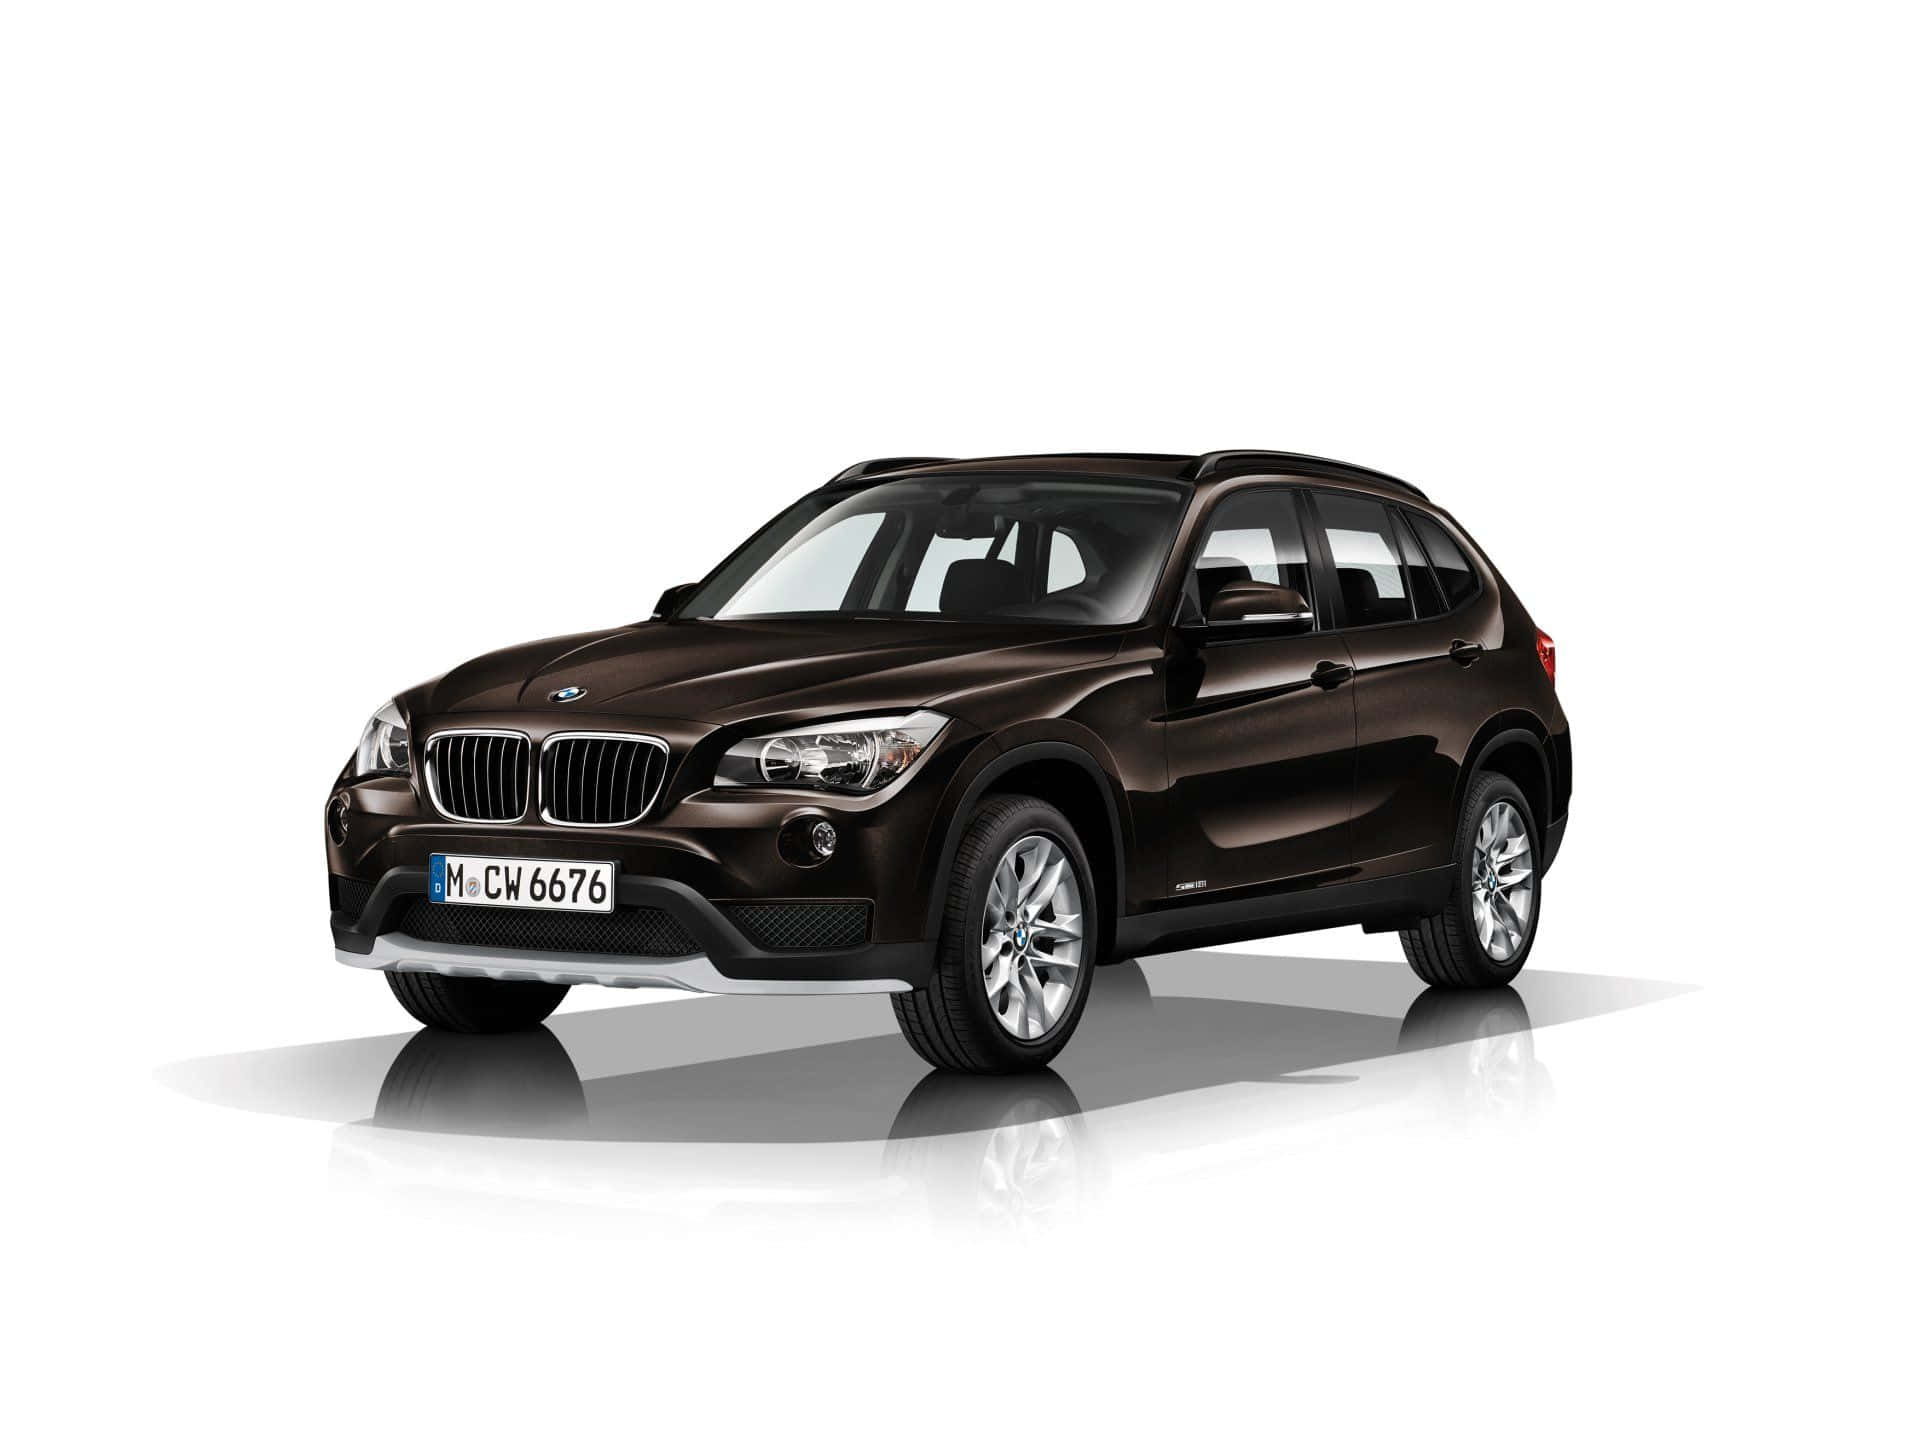 Stylish BMW X1 in motion on a stunning scenic route Wallpaper